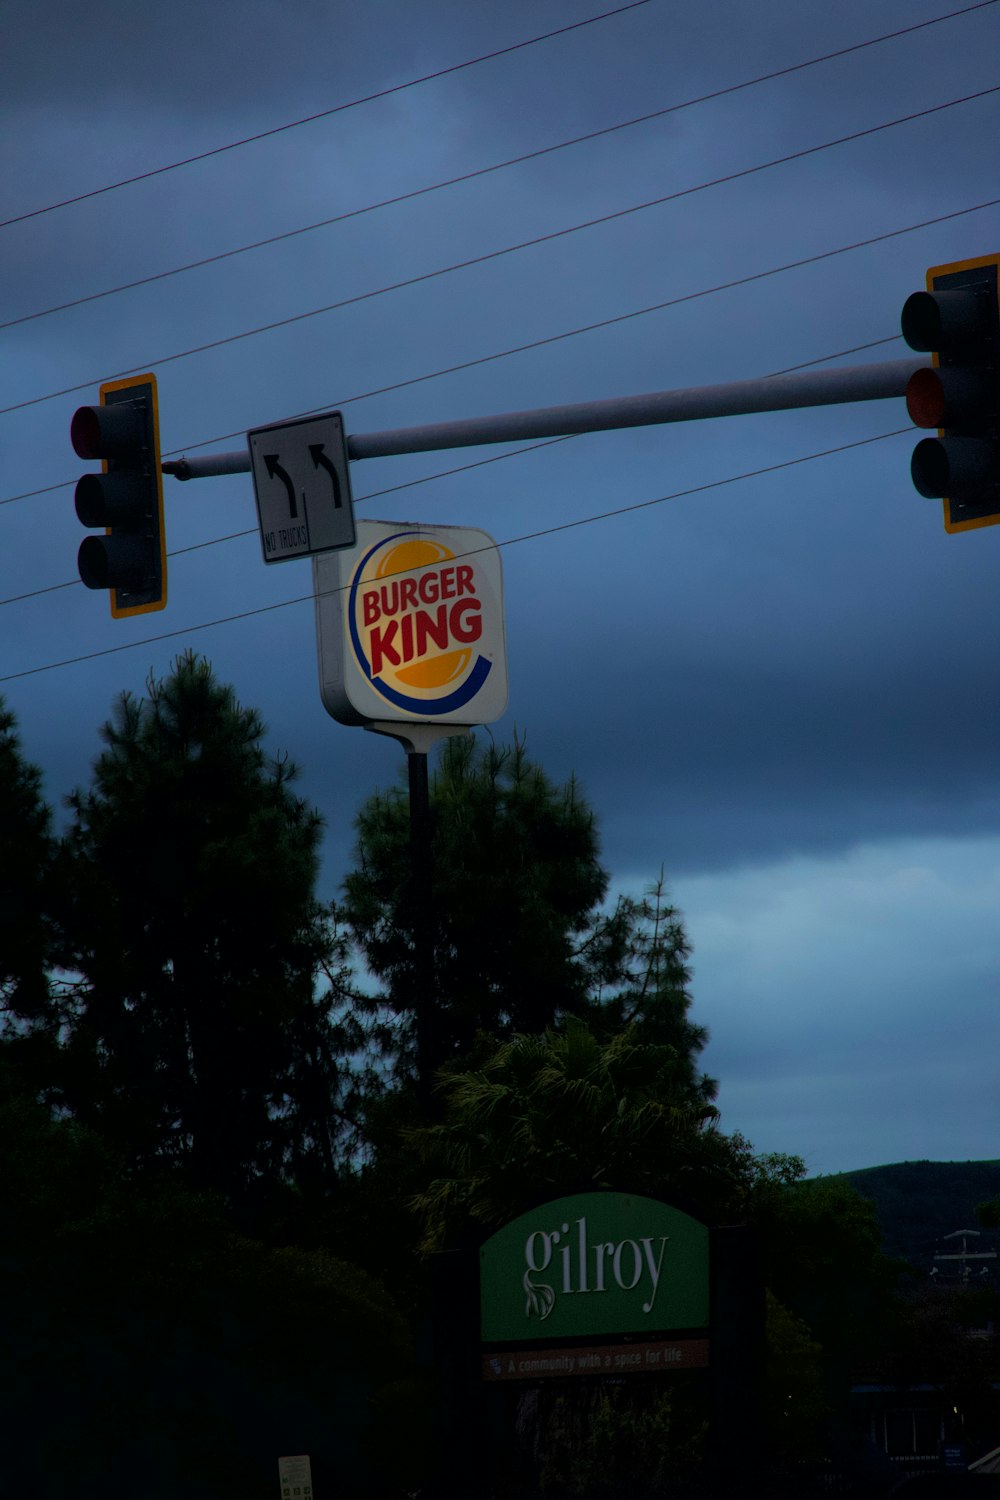 a burger king sign and traffic lights on a cloudy day